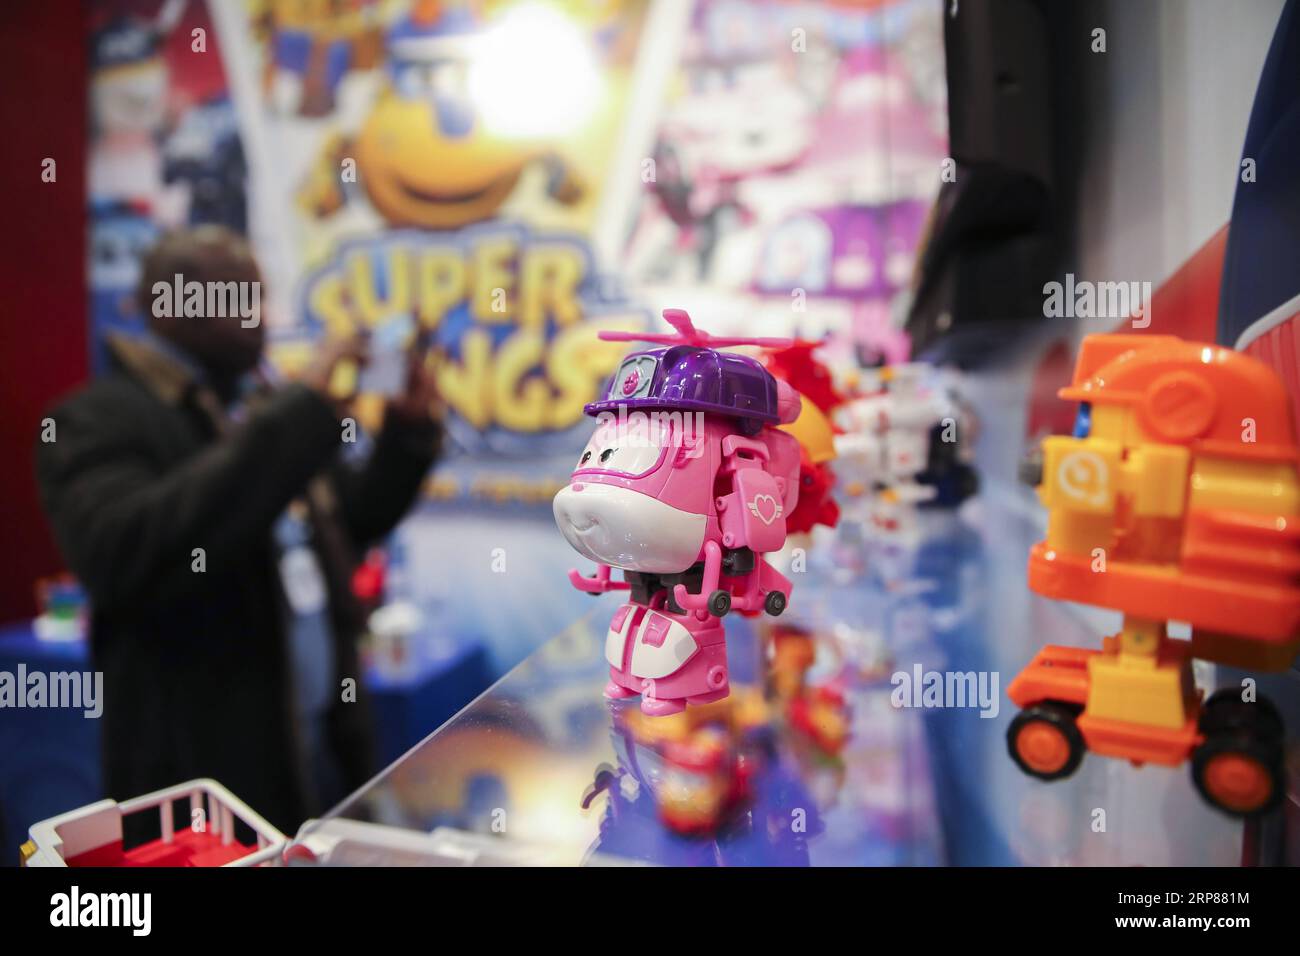 (190221) -- NEW YORK, Feb. 21, 2019 -- Cartoon characters of Super Wings is seen at the booth of Alpha Group Co., Ltd., a major animation, toy and entertainment player from Guangdong Province in southern China, during the 116th Annual North American International Toy Fair at the Jacob K. Javits Convention Center in New York, the United States, Feb. 19, 2019. Chinese toy manufacturers, which produce around 75 percent of global toys each year, are rising up the value chain from the original role as contract manufacturers to designers and makers of their own brands. ) U.S.-NEW YORK-CHINESE TOY PR Stock Photo